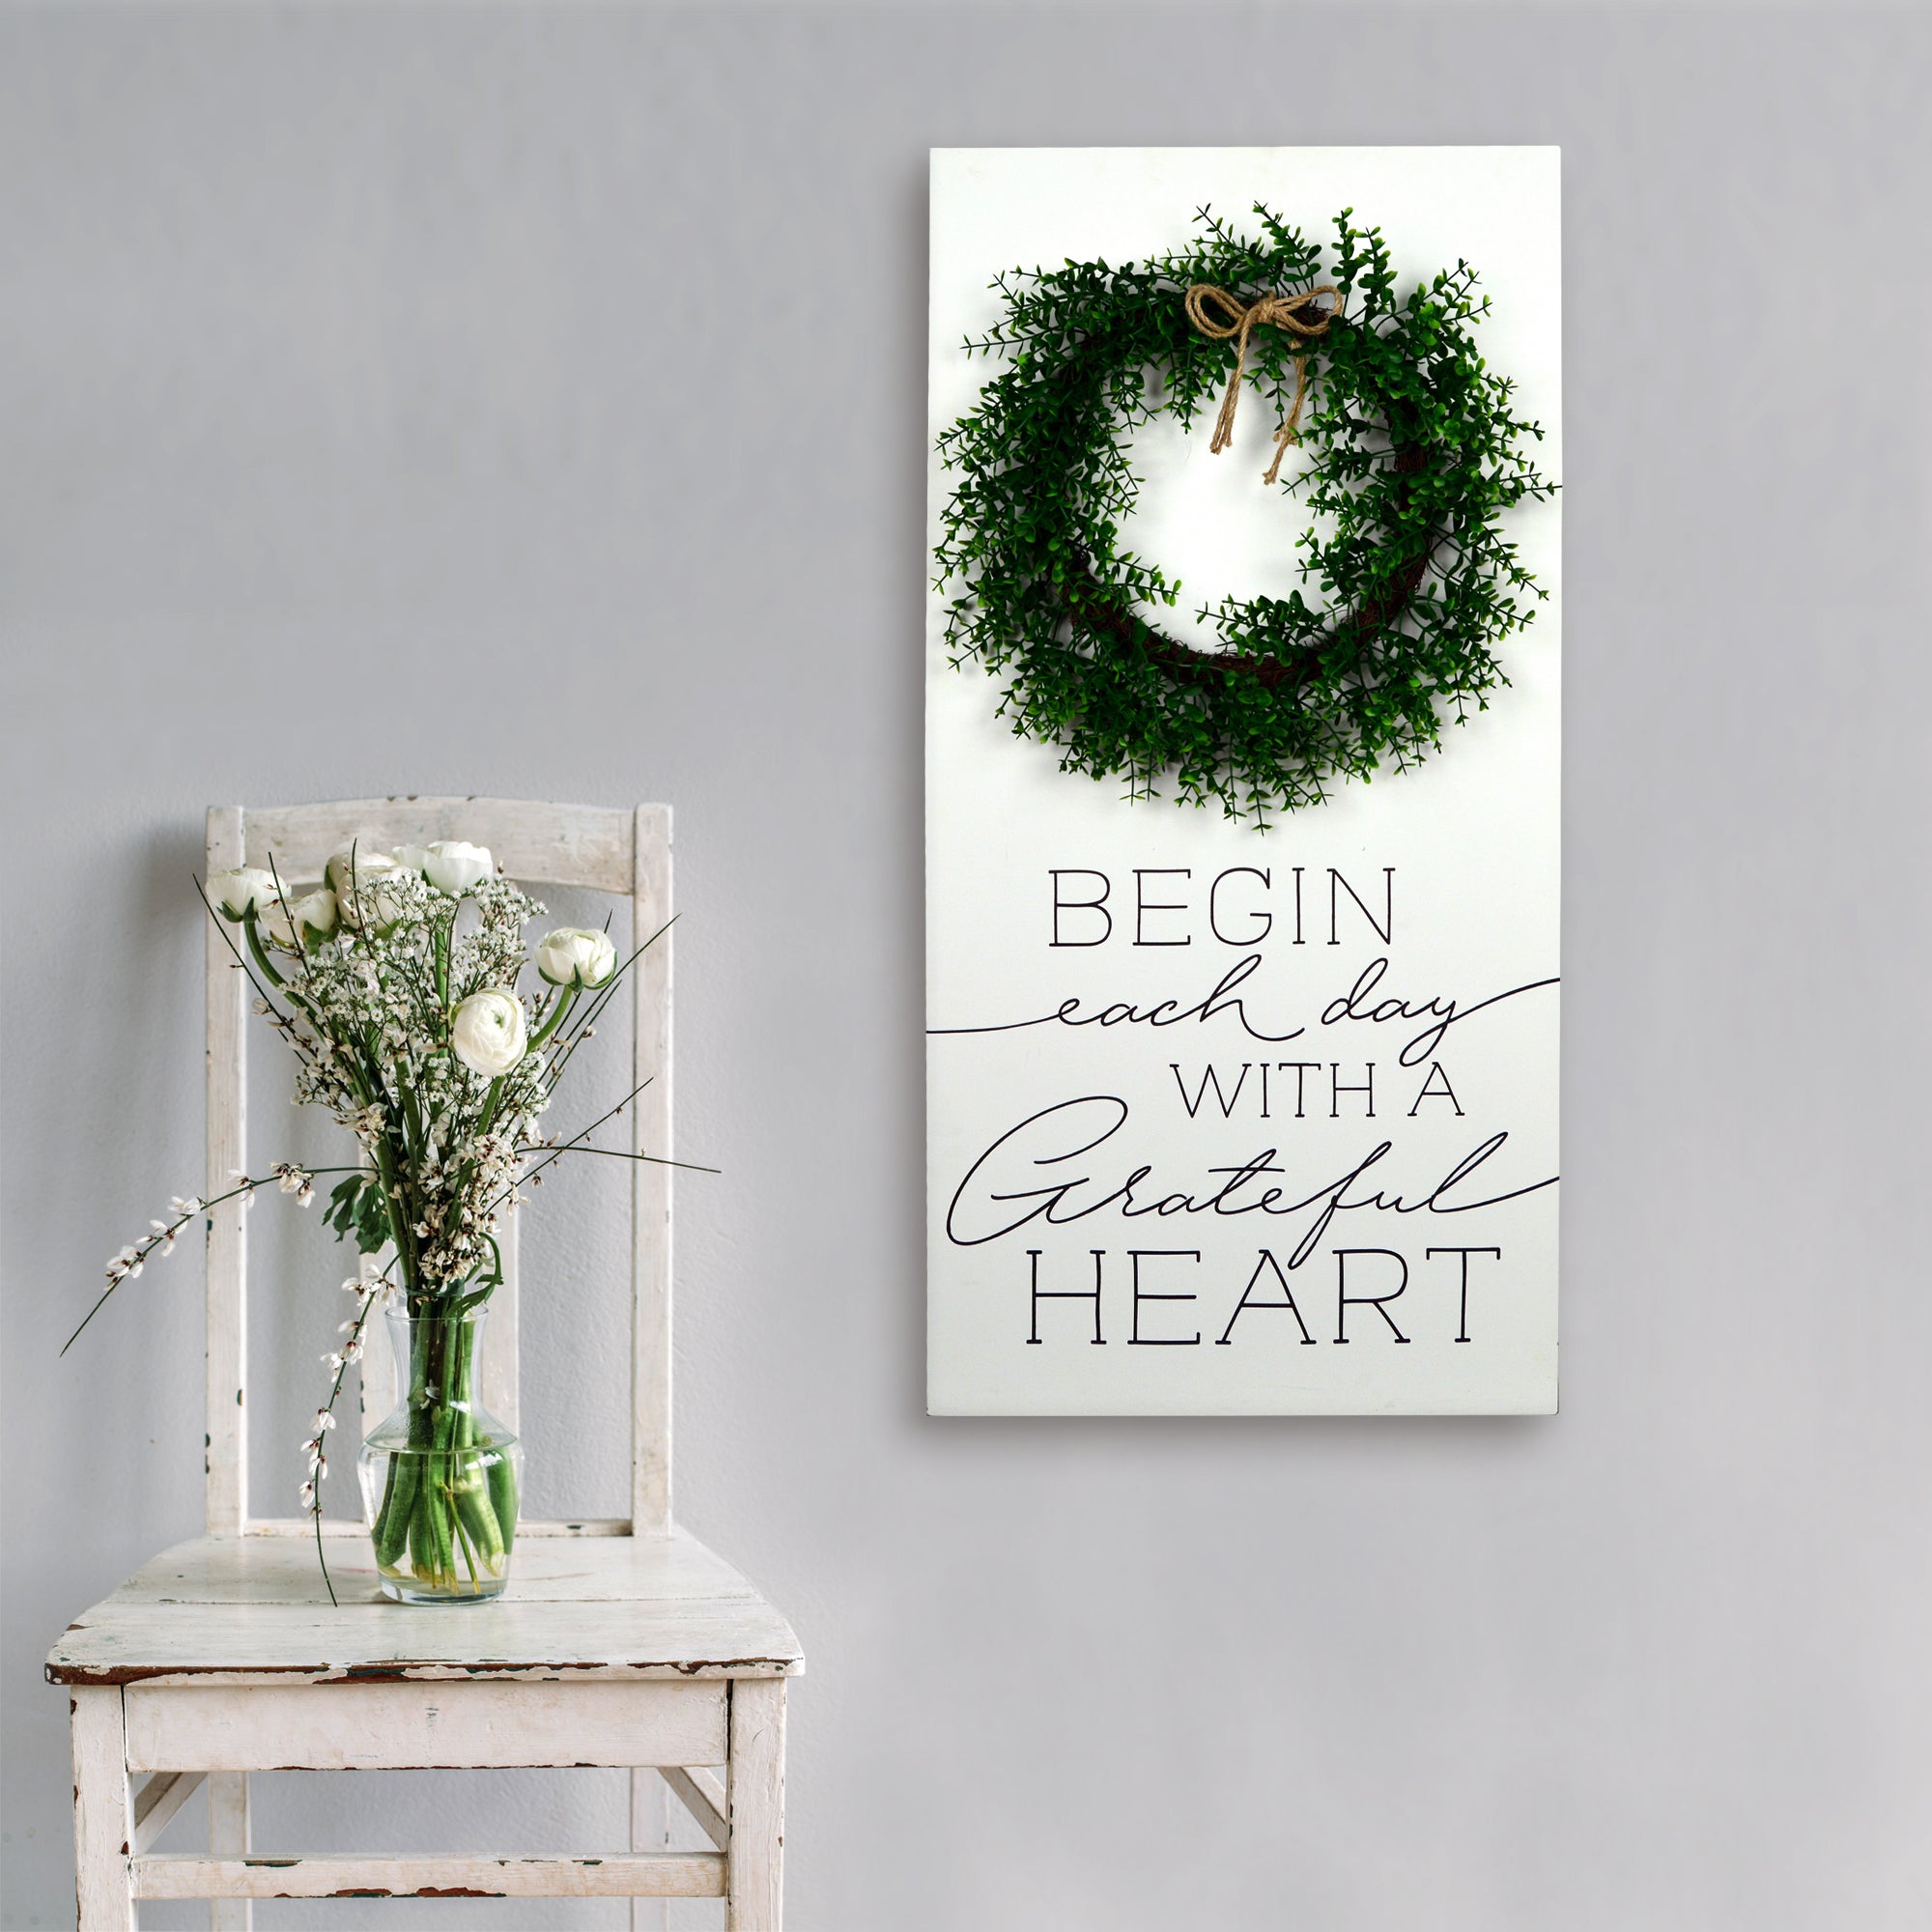 New View Studio 18"x 36" Begin Each Day Wood Box with Faux Greenery Wall Art